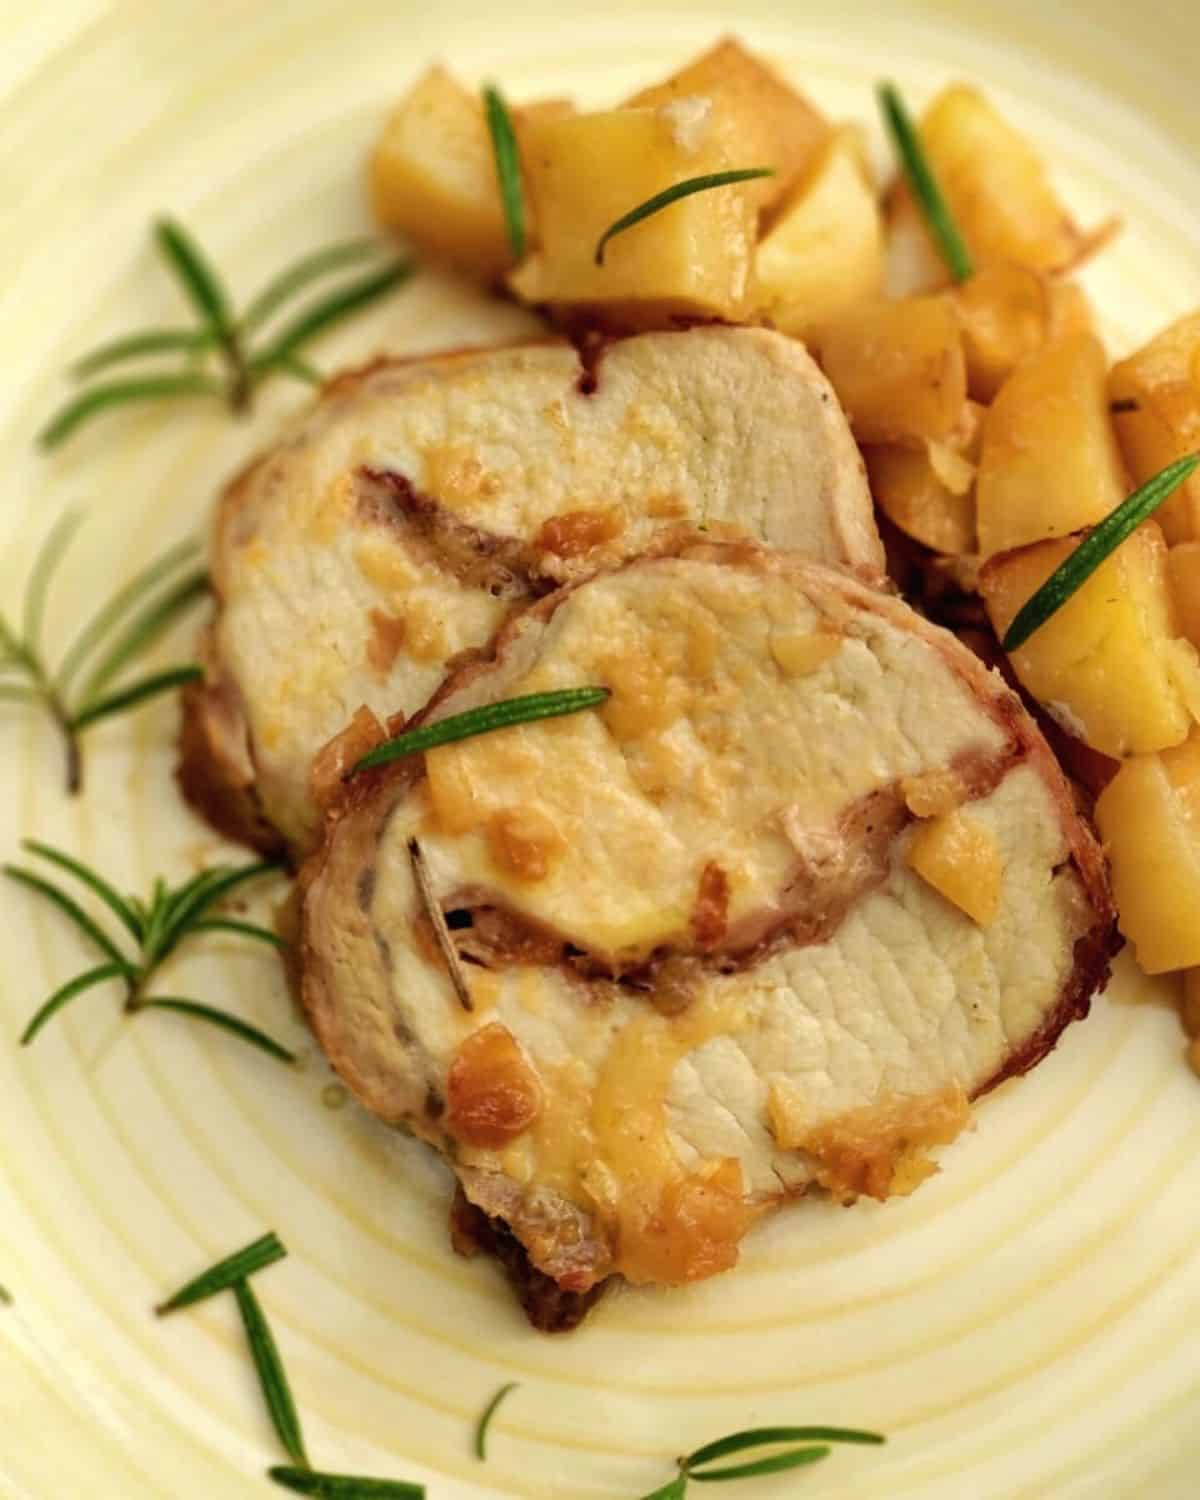 A close up of Aromatic Roasted Pork Roulade in a light dish with some roasted potatoes aside